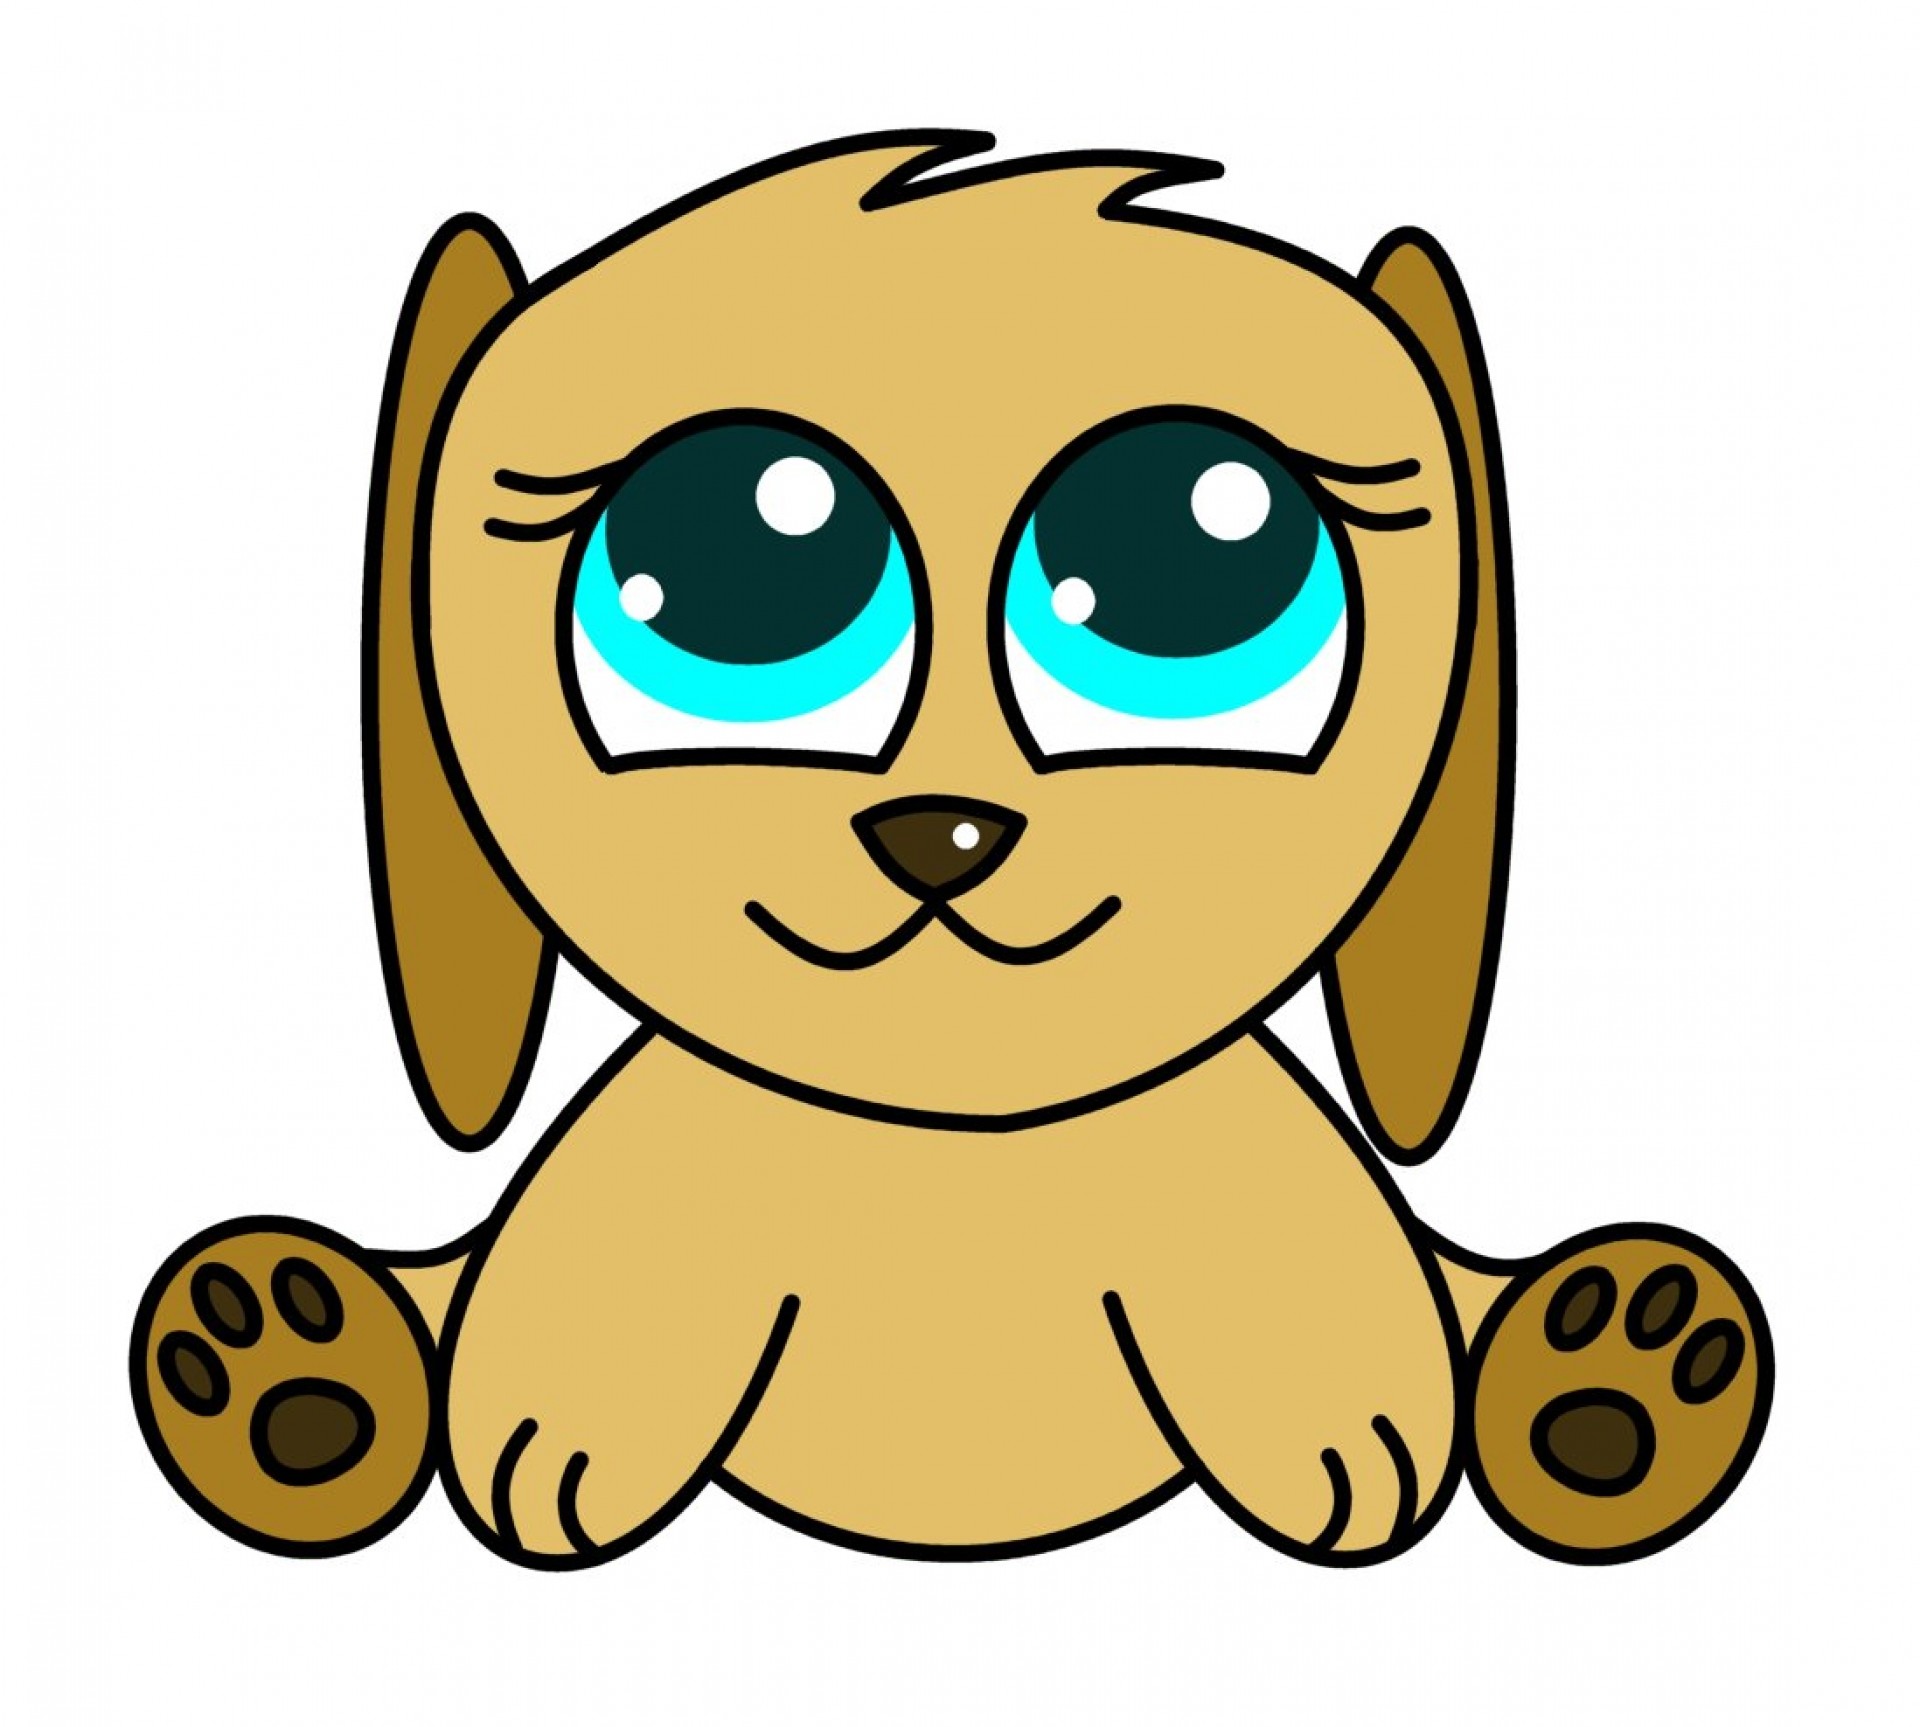 Puppy Cartoons Cute Cartoon Puppy Dogs Cute Cartoon Puppy Kids In Coloring Pages Draw A Cartoon